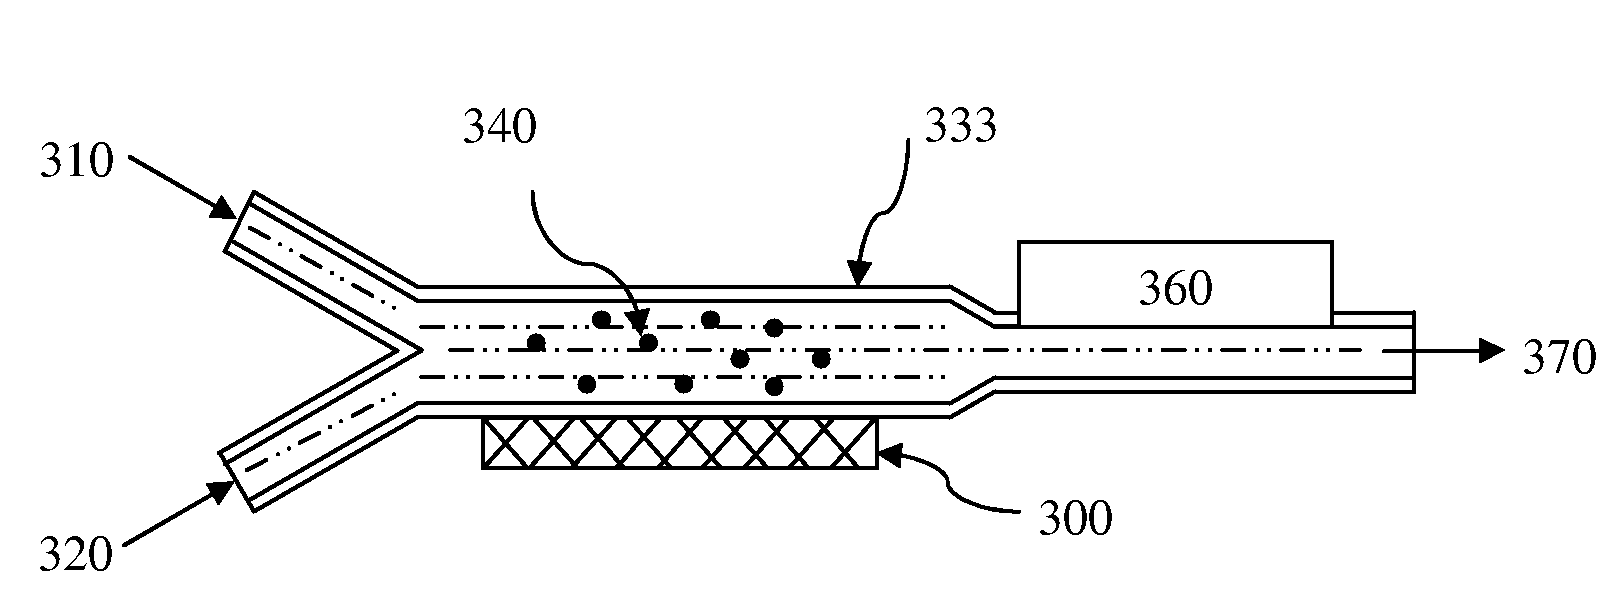 Apparatus for ultrasonic stirring of liquids in small volumes